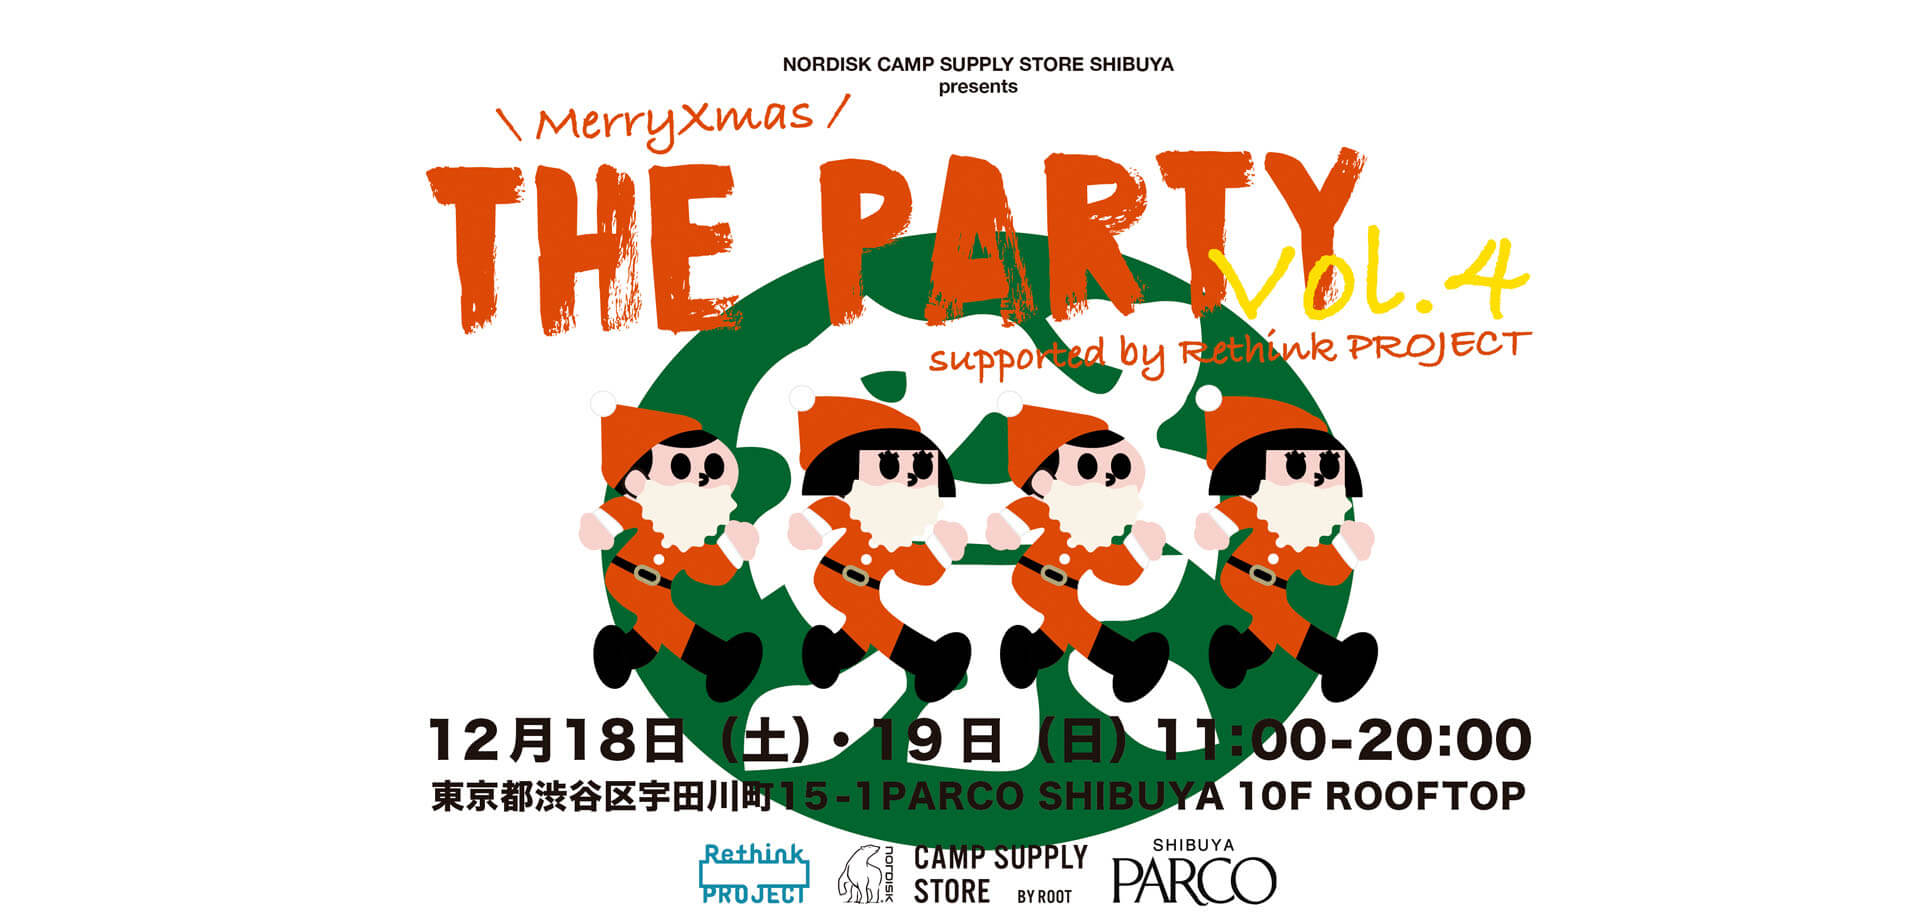 THE PARTY vol.4 supported by Rethink PROJECT 渋谷パルコ